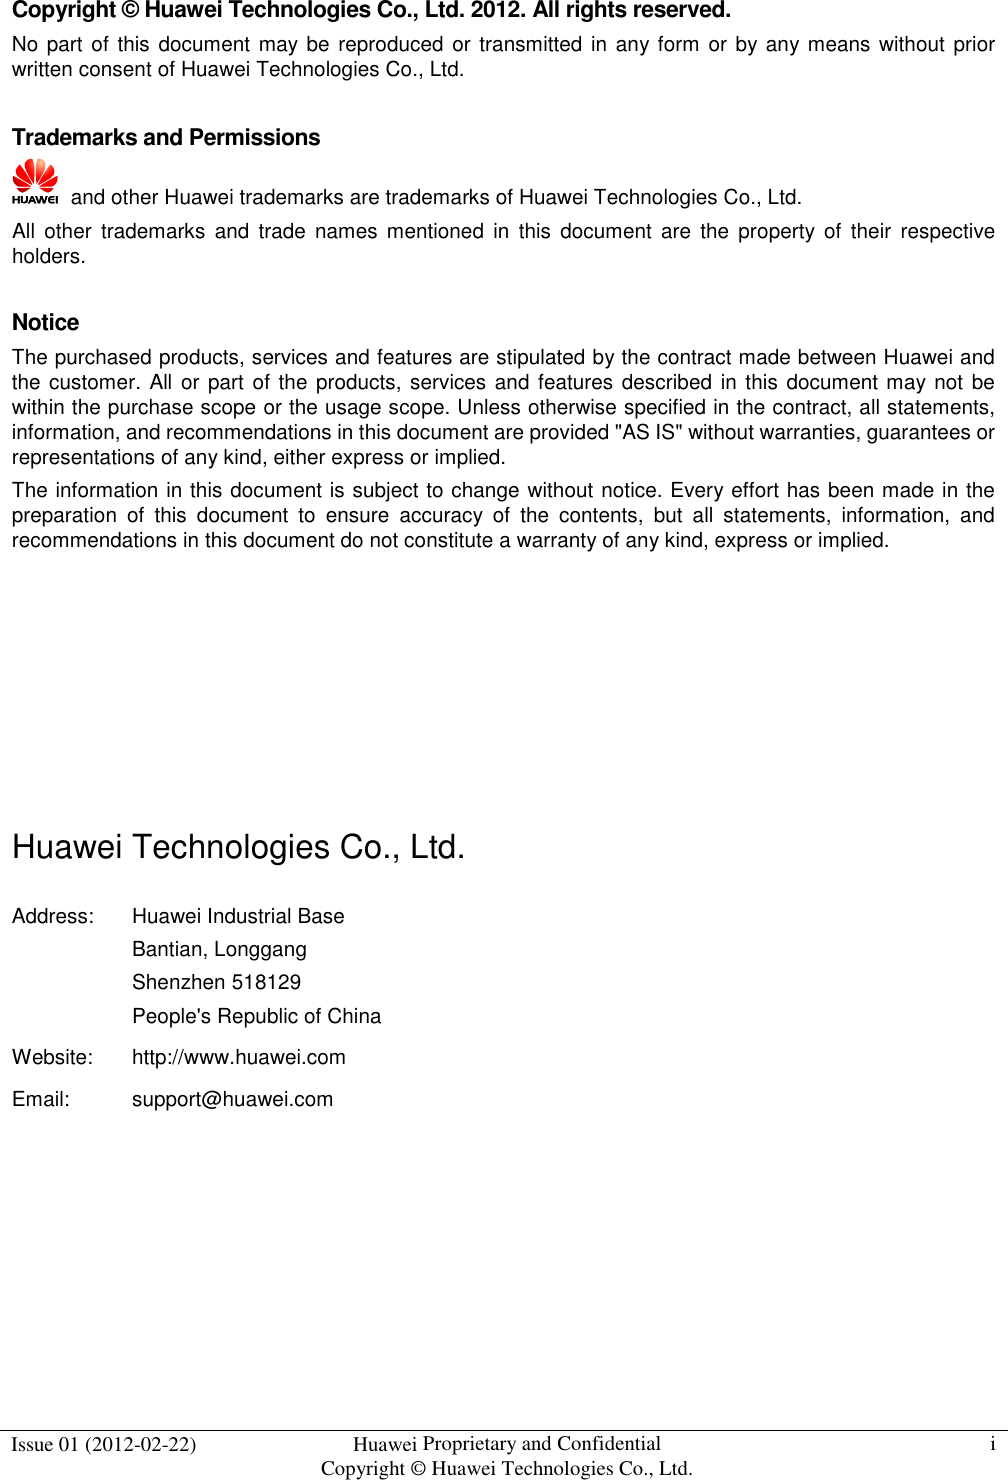  Issue 01 (2012-02-22)  Huawei Proprietary and Confidential           Copyright © Huawei Technologies Co., Ltd. i  Copyright © Huawei Technologies Co., Ltd. 2012. All rights reserved. No part of  this  document  may be reproduced or transmitted in  any form or by any means without prior written consent of Huawei Technologies Co., Ltd.  Trademarks and Permissions   and other Huawei trademarks are trademarks of Huawei Technologies Co., Ltd. All  other  trademarks  and  trade  names  mentioned  in  this  document  are  the  property  of  their  respective holders.  Notice The purchased products, services and features are stipulated by the contract made between Huawei and the customer. All or part of the products, services and features described  in this document may not  be within the purchase scope or the usage scope. Unless otherwise specified in the contract, all statements, information, and recommendations in this document are provided &quot;AS IS&quot; without warranties, guarantees or representations of any kind, either express or implied. The information in this document is subject to change without notice. Every effort has been made in the preparation  of  this  document  to  ensure  accuracy  of  the  contents,  but  all  statements,  information,  and recommendations in this document do not constitute a warranty of any kind, express or implied.       Huawei Technologies Co., Ltd. Address:  Huawei Industrial Base Bantian, Longgang Shenzhen 518129 People&apos;s Republic of China Website:  http://www.huawei.com Email:  support@huawei.com   